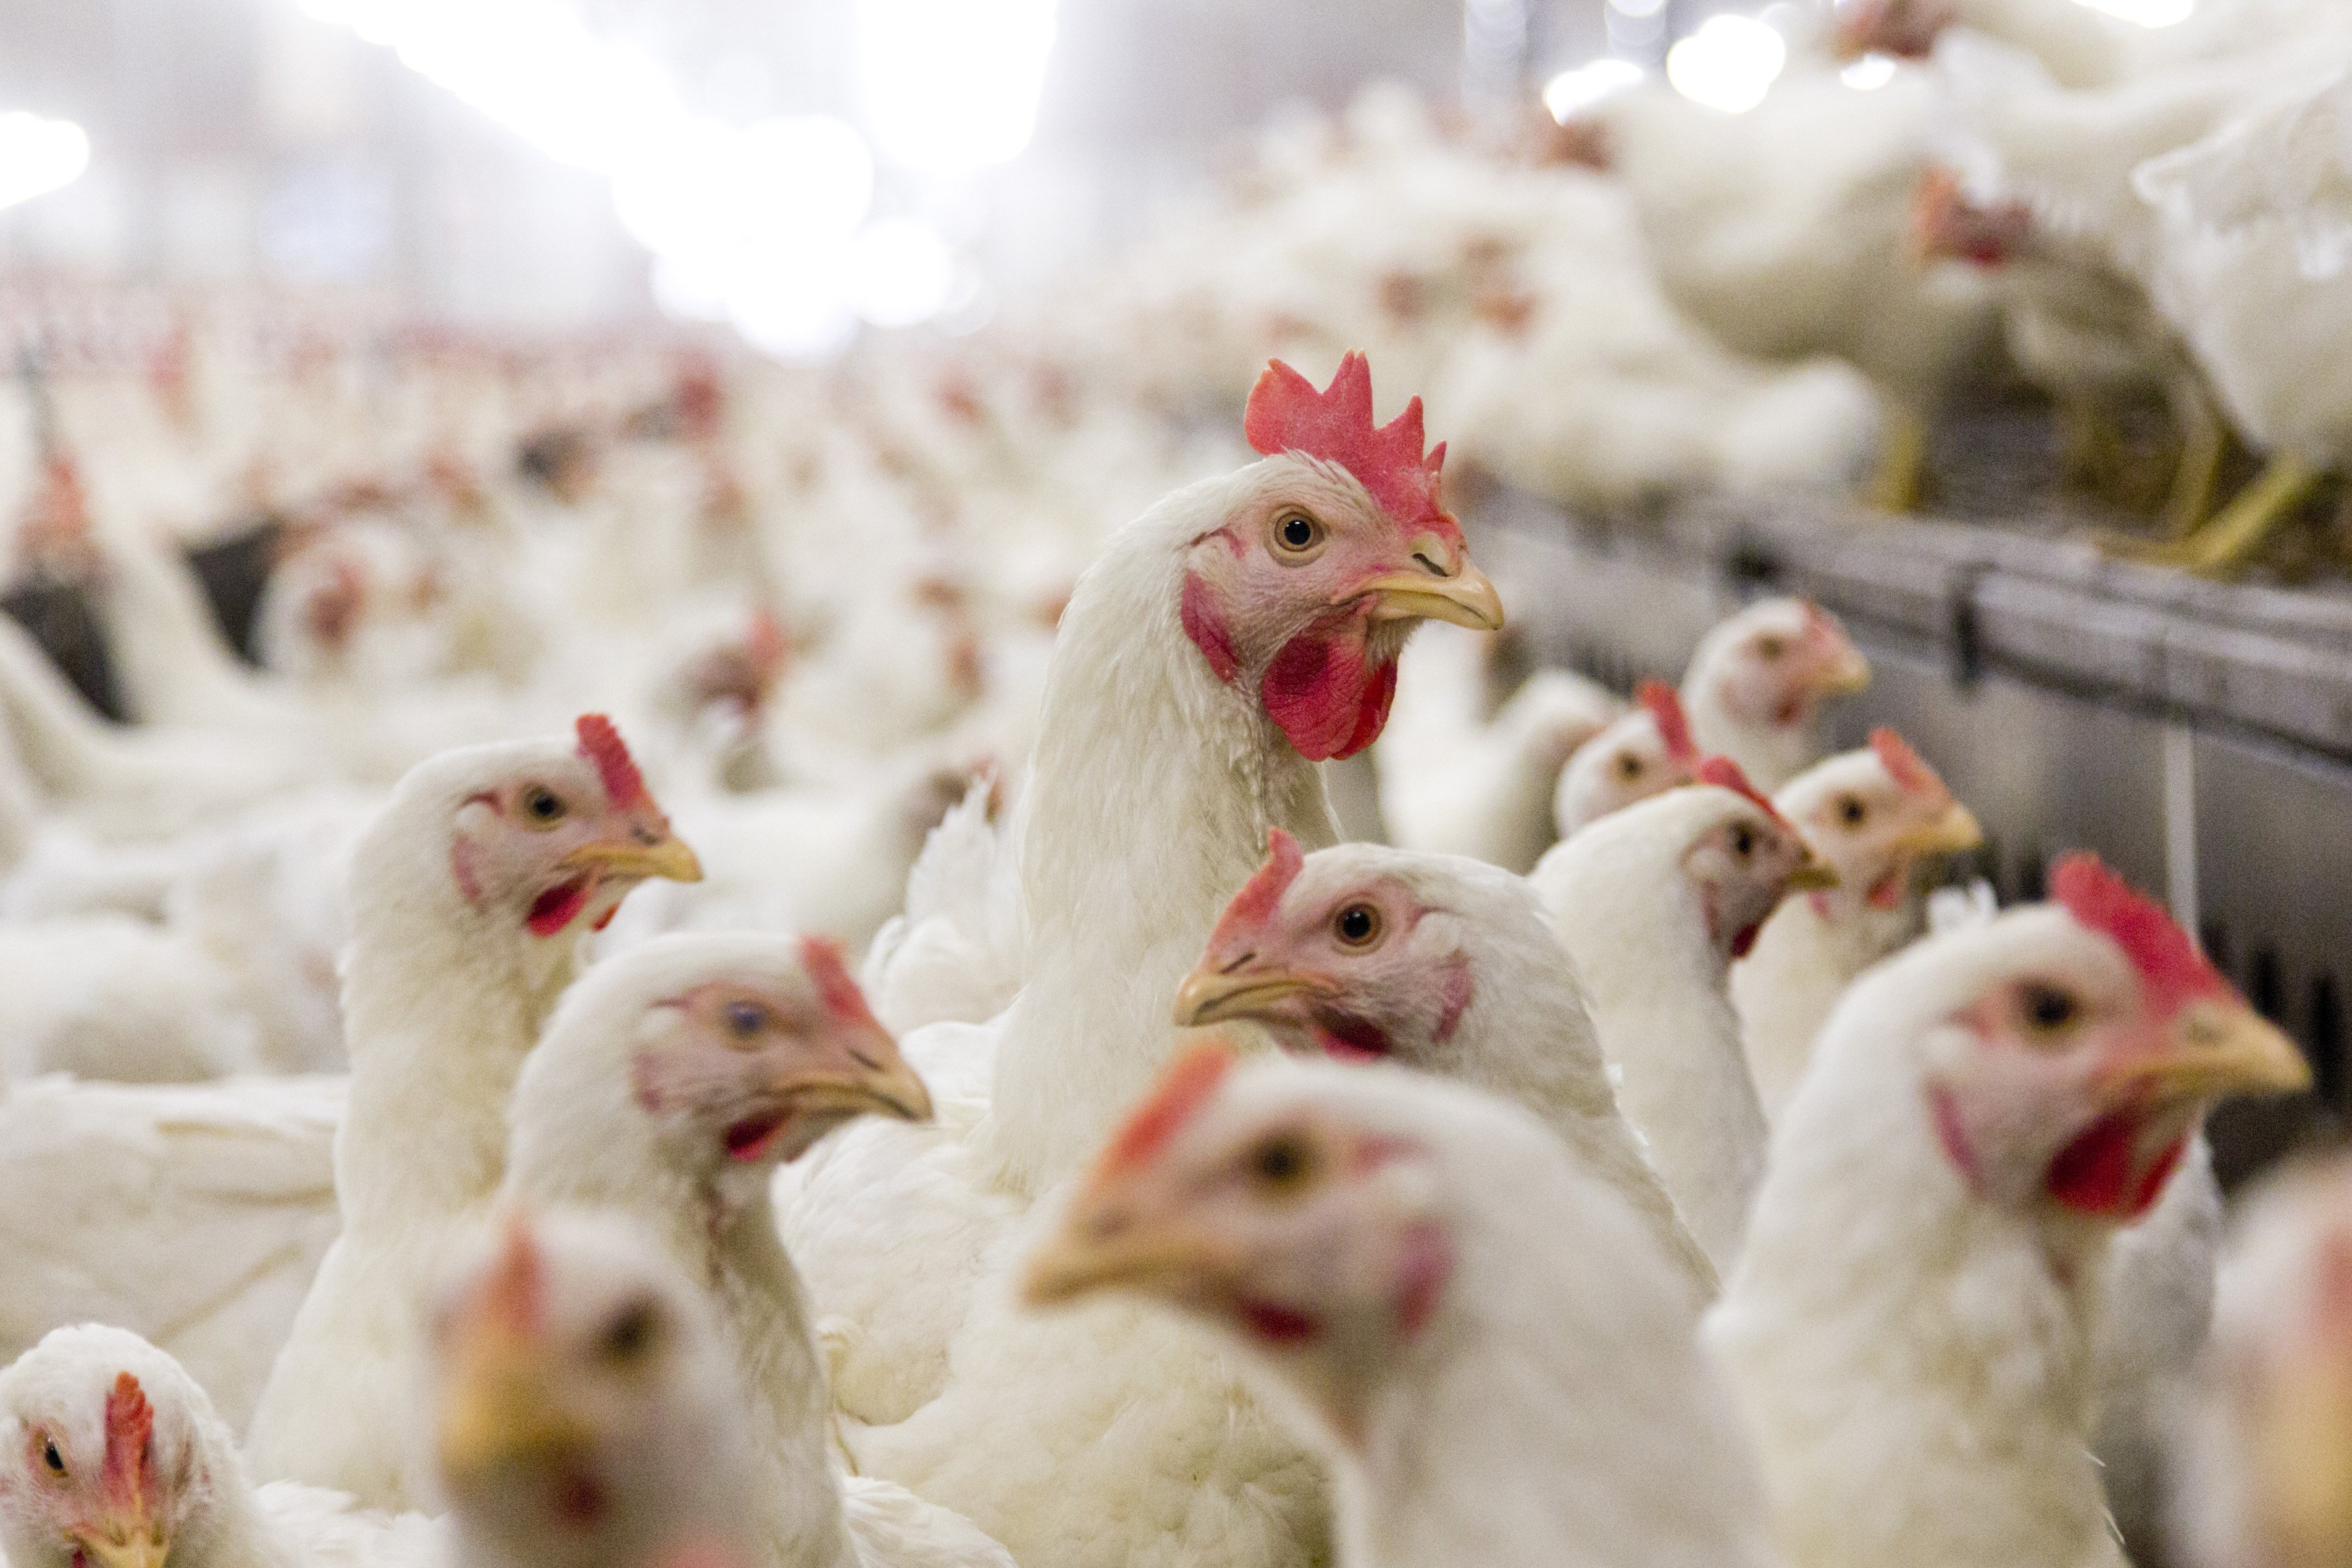 The “Brexit: getting the best deal for animals” report, produced by animal protection groups and brought together through Wildlife and Countryside Link and the UK Centre for Animal Law, includes a section on poultry within the animals in agriculture section. Photo: Bart Nijls